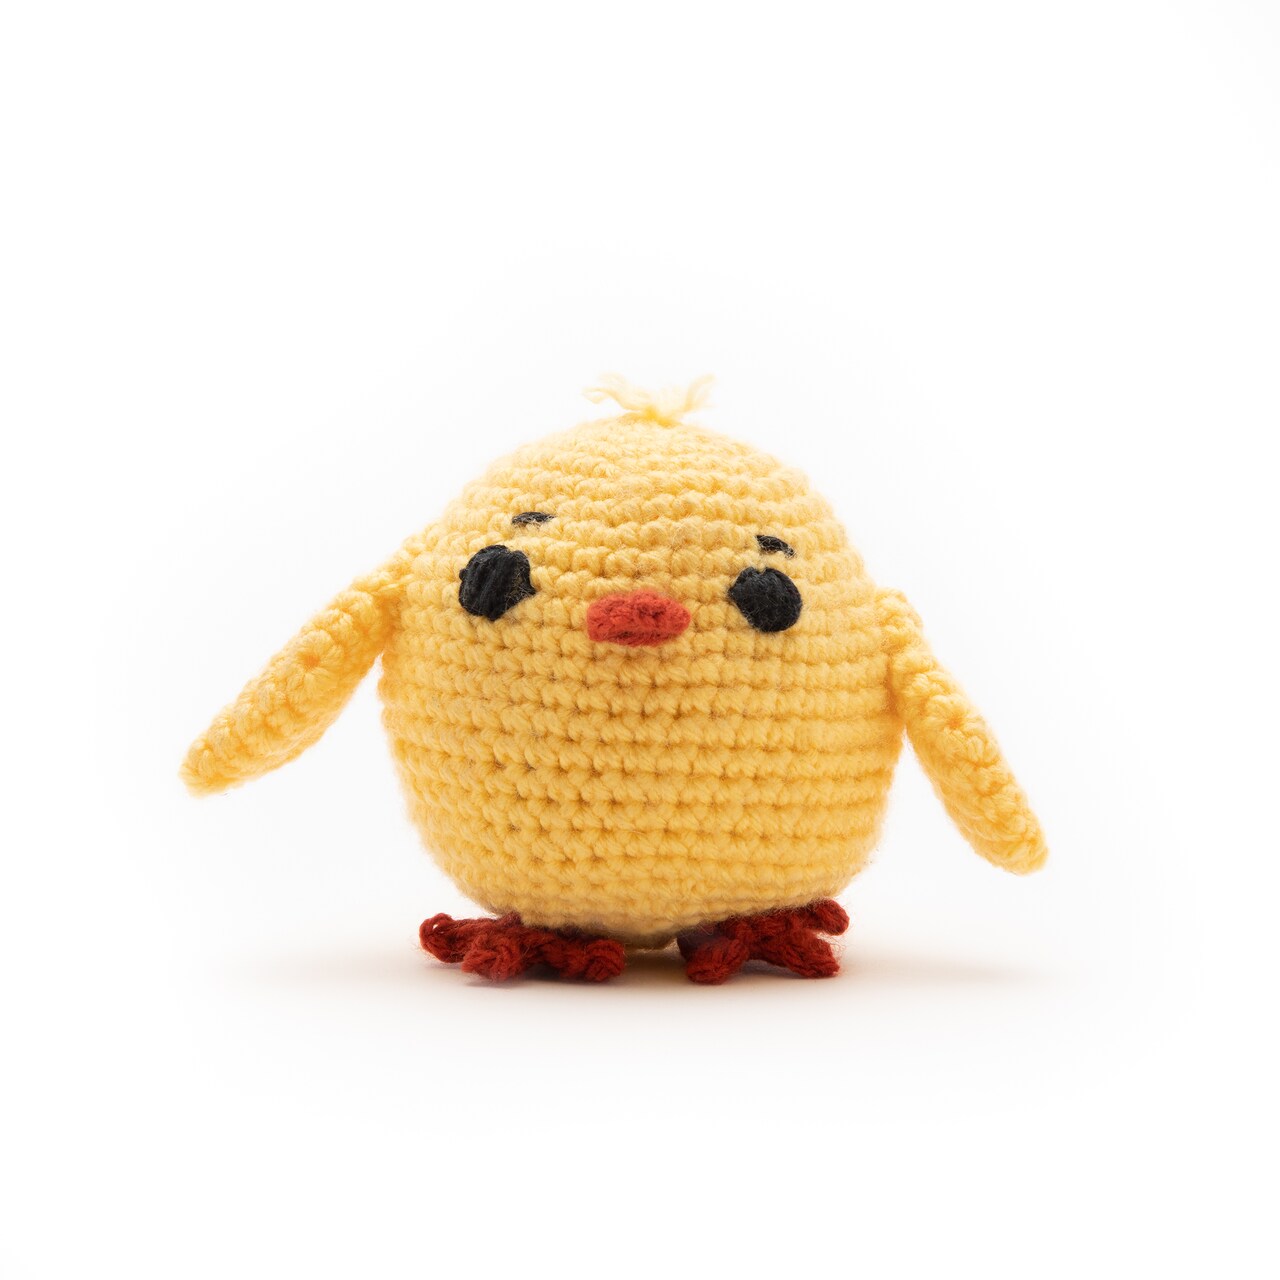 Crochet Amigurumi - Little Chick with Loops & Threads